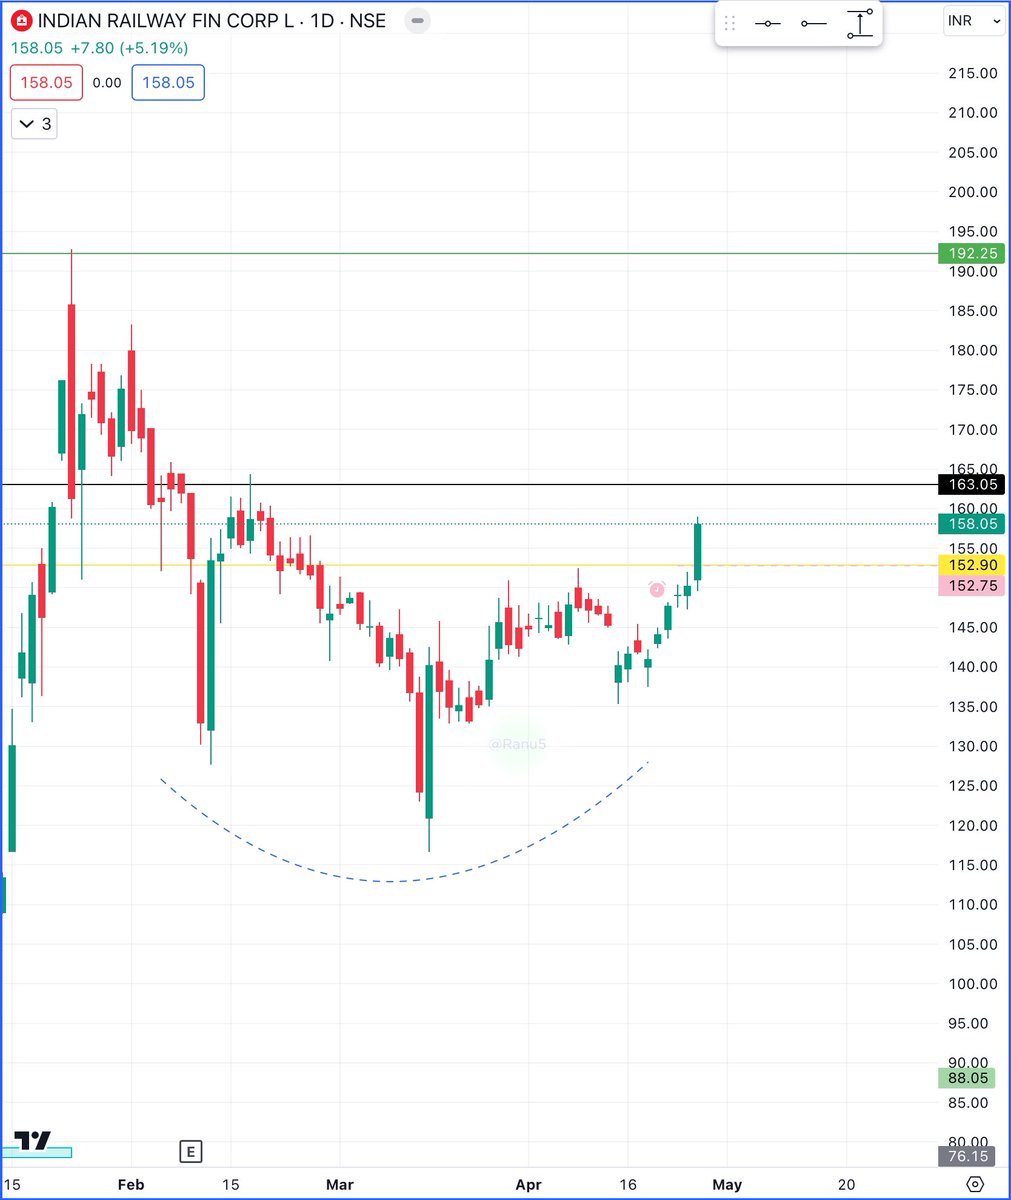 #irfc CMP 158 Expected levels 192 Retrace levels 152 Main congestion at 163⚠️ SL is mandatory as per your risk appetite It’s not a. Buy sell recommendation #StocksInFocus #StockToWatch #BREAKOUTSTOCKS